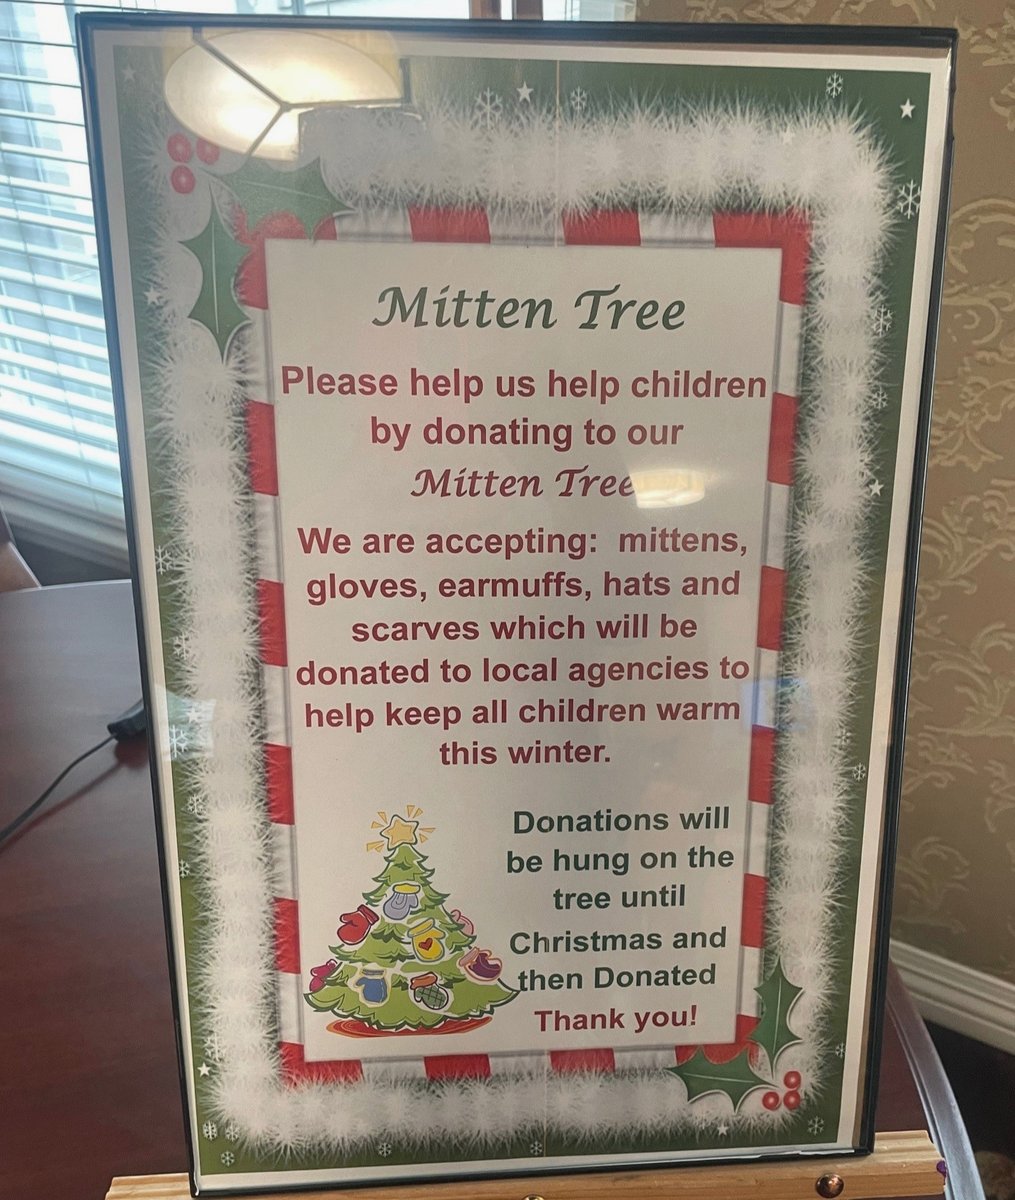 Bethlehem resident, families and co-workers are channeling their generosity and kindness in supporting the campus Mitten Tree. Donations will go to children via local agencies. Spreading holiday cheer, one mitten at a time. #charity #holidayspirit #generosity #kindness